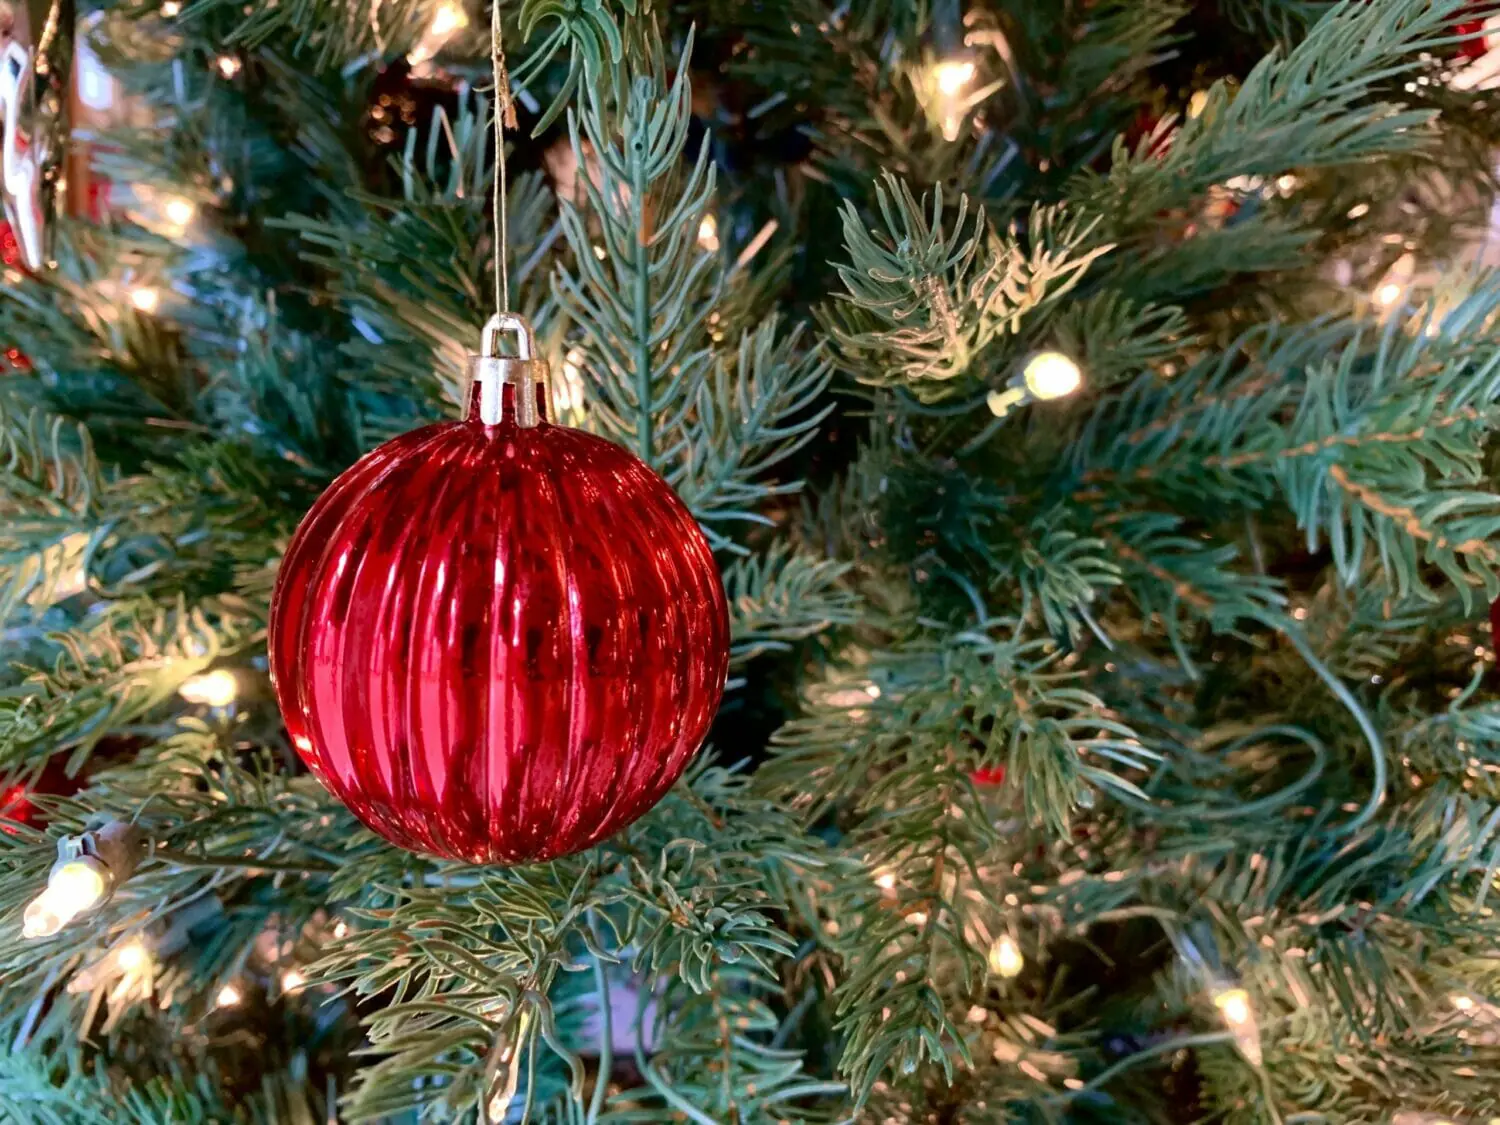 In this image: A red ornament on a Christmas tree.